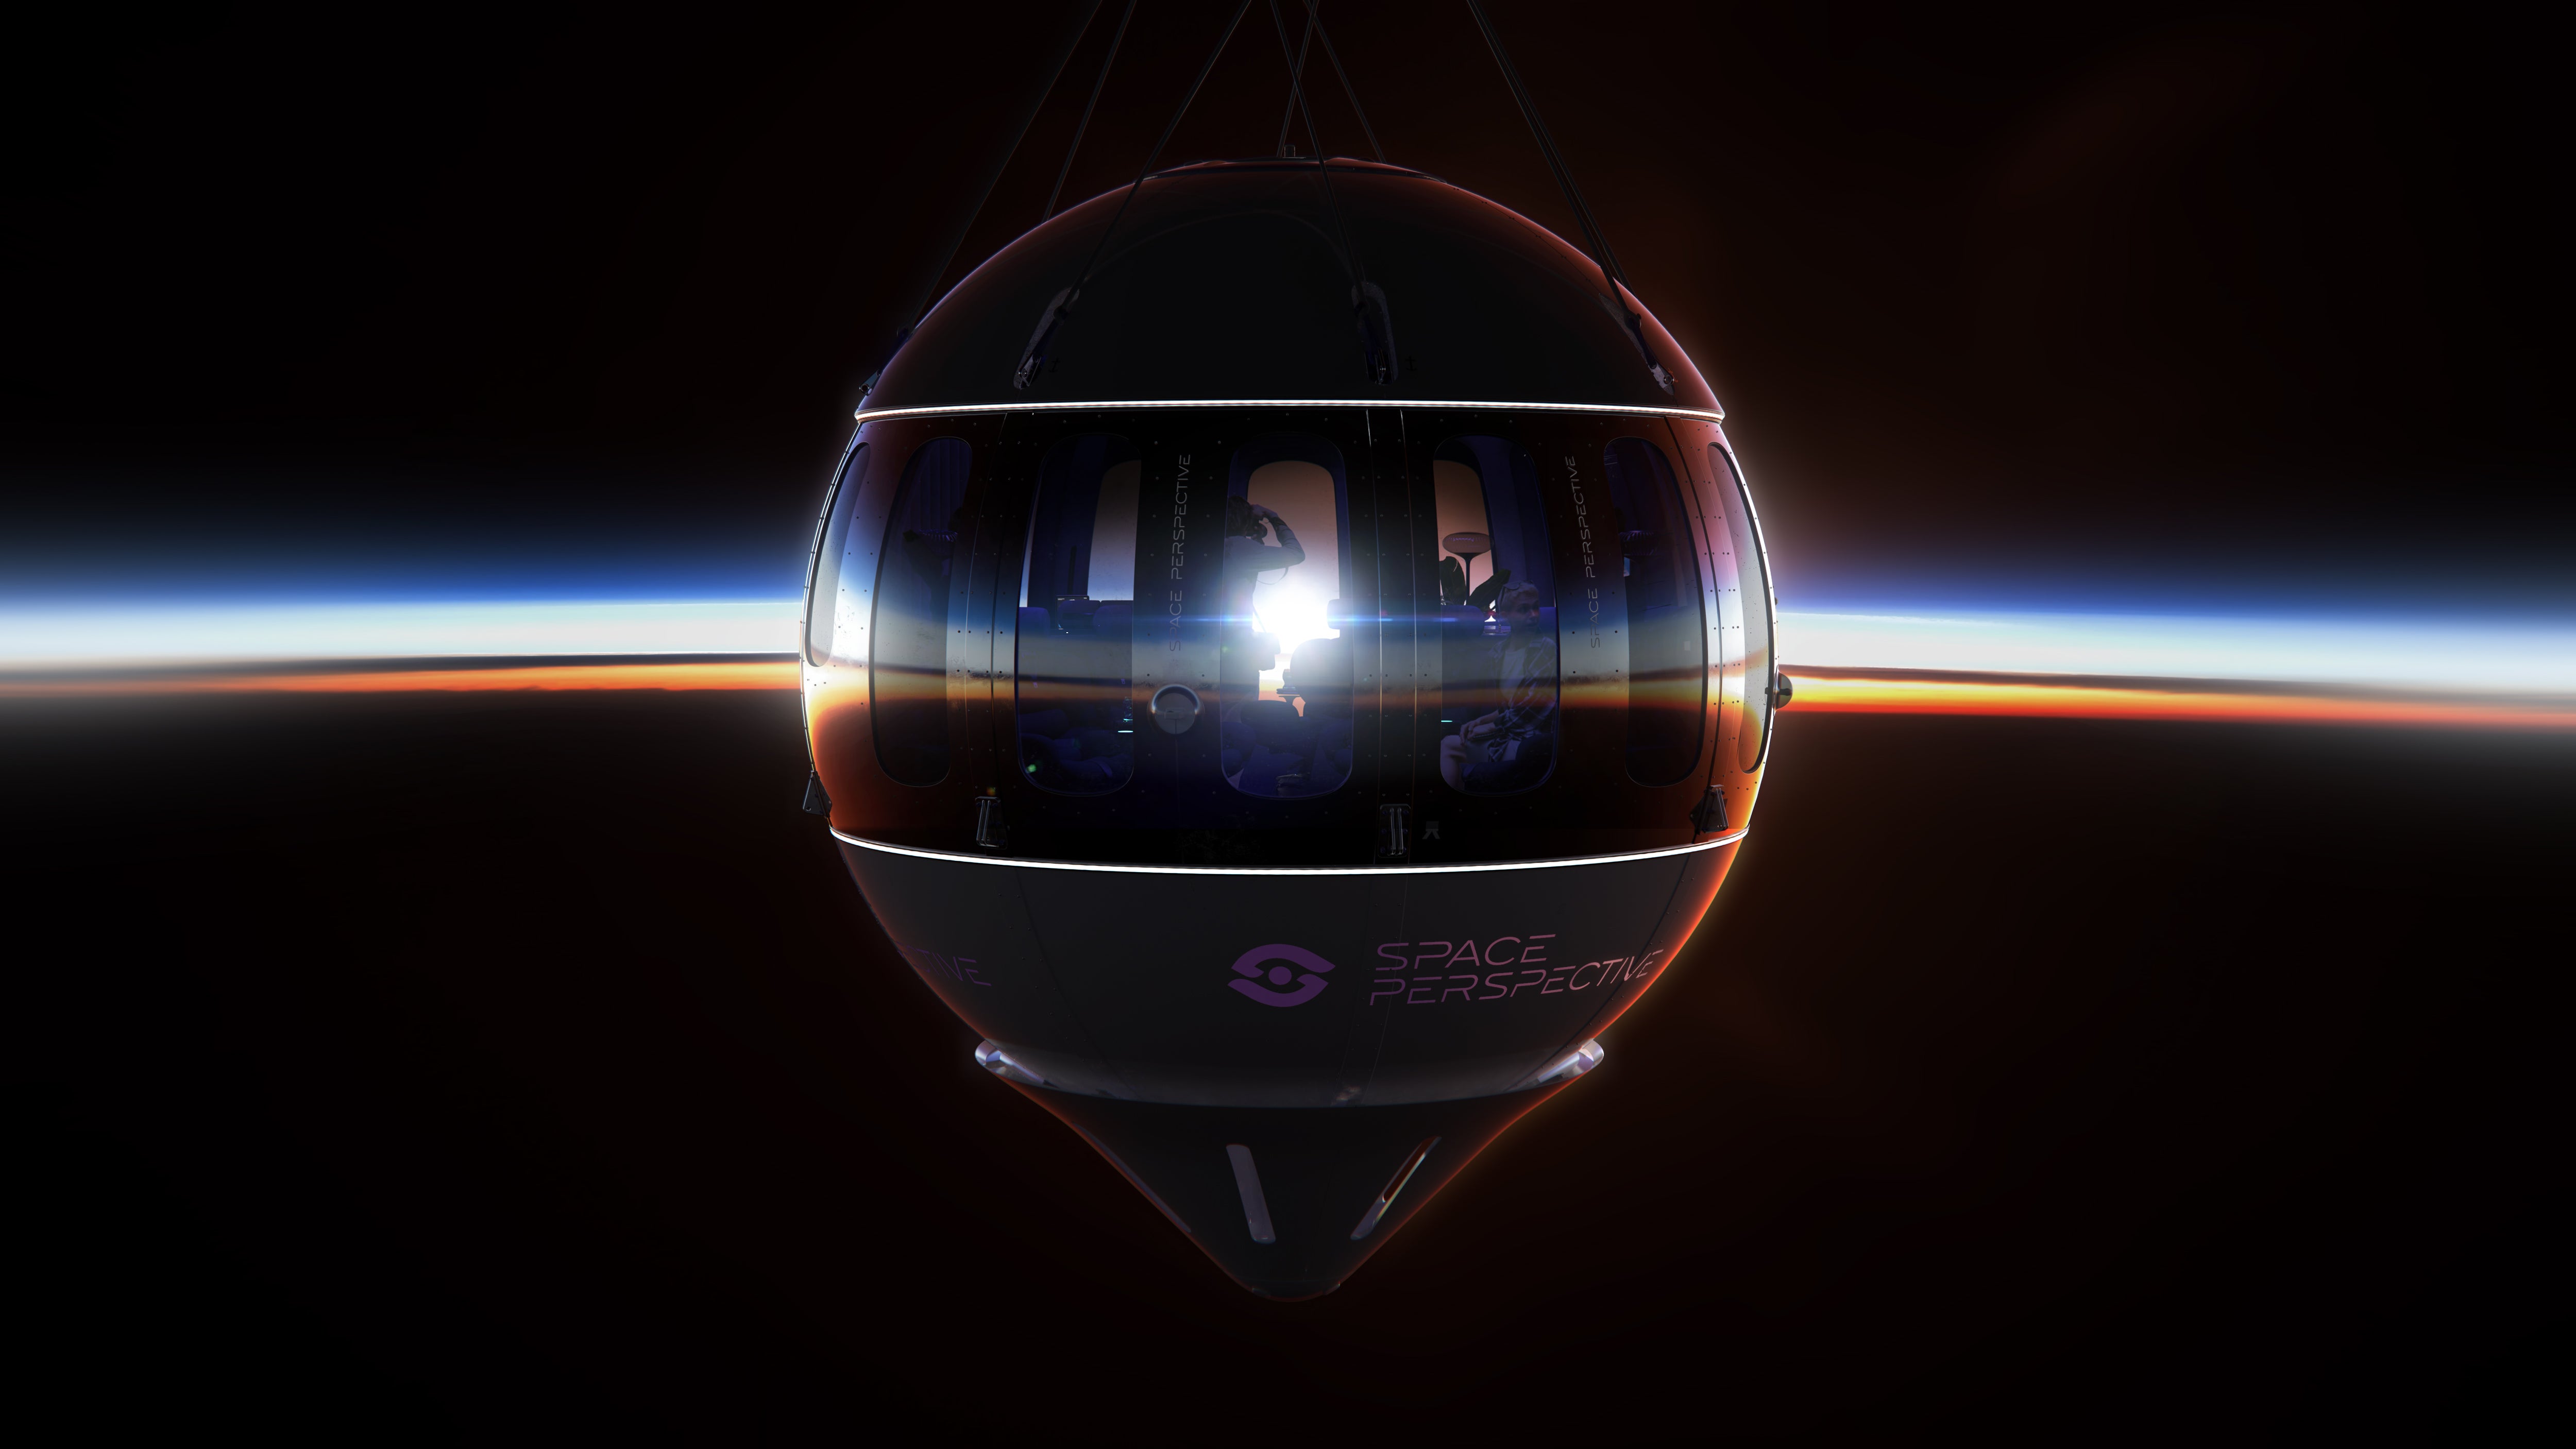 Conceptual view showing the front of the capsule during sunrise.  (Image: Space Perspective)